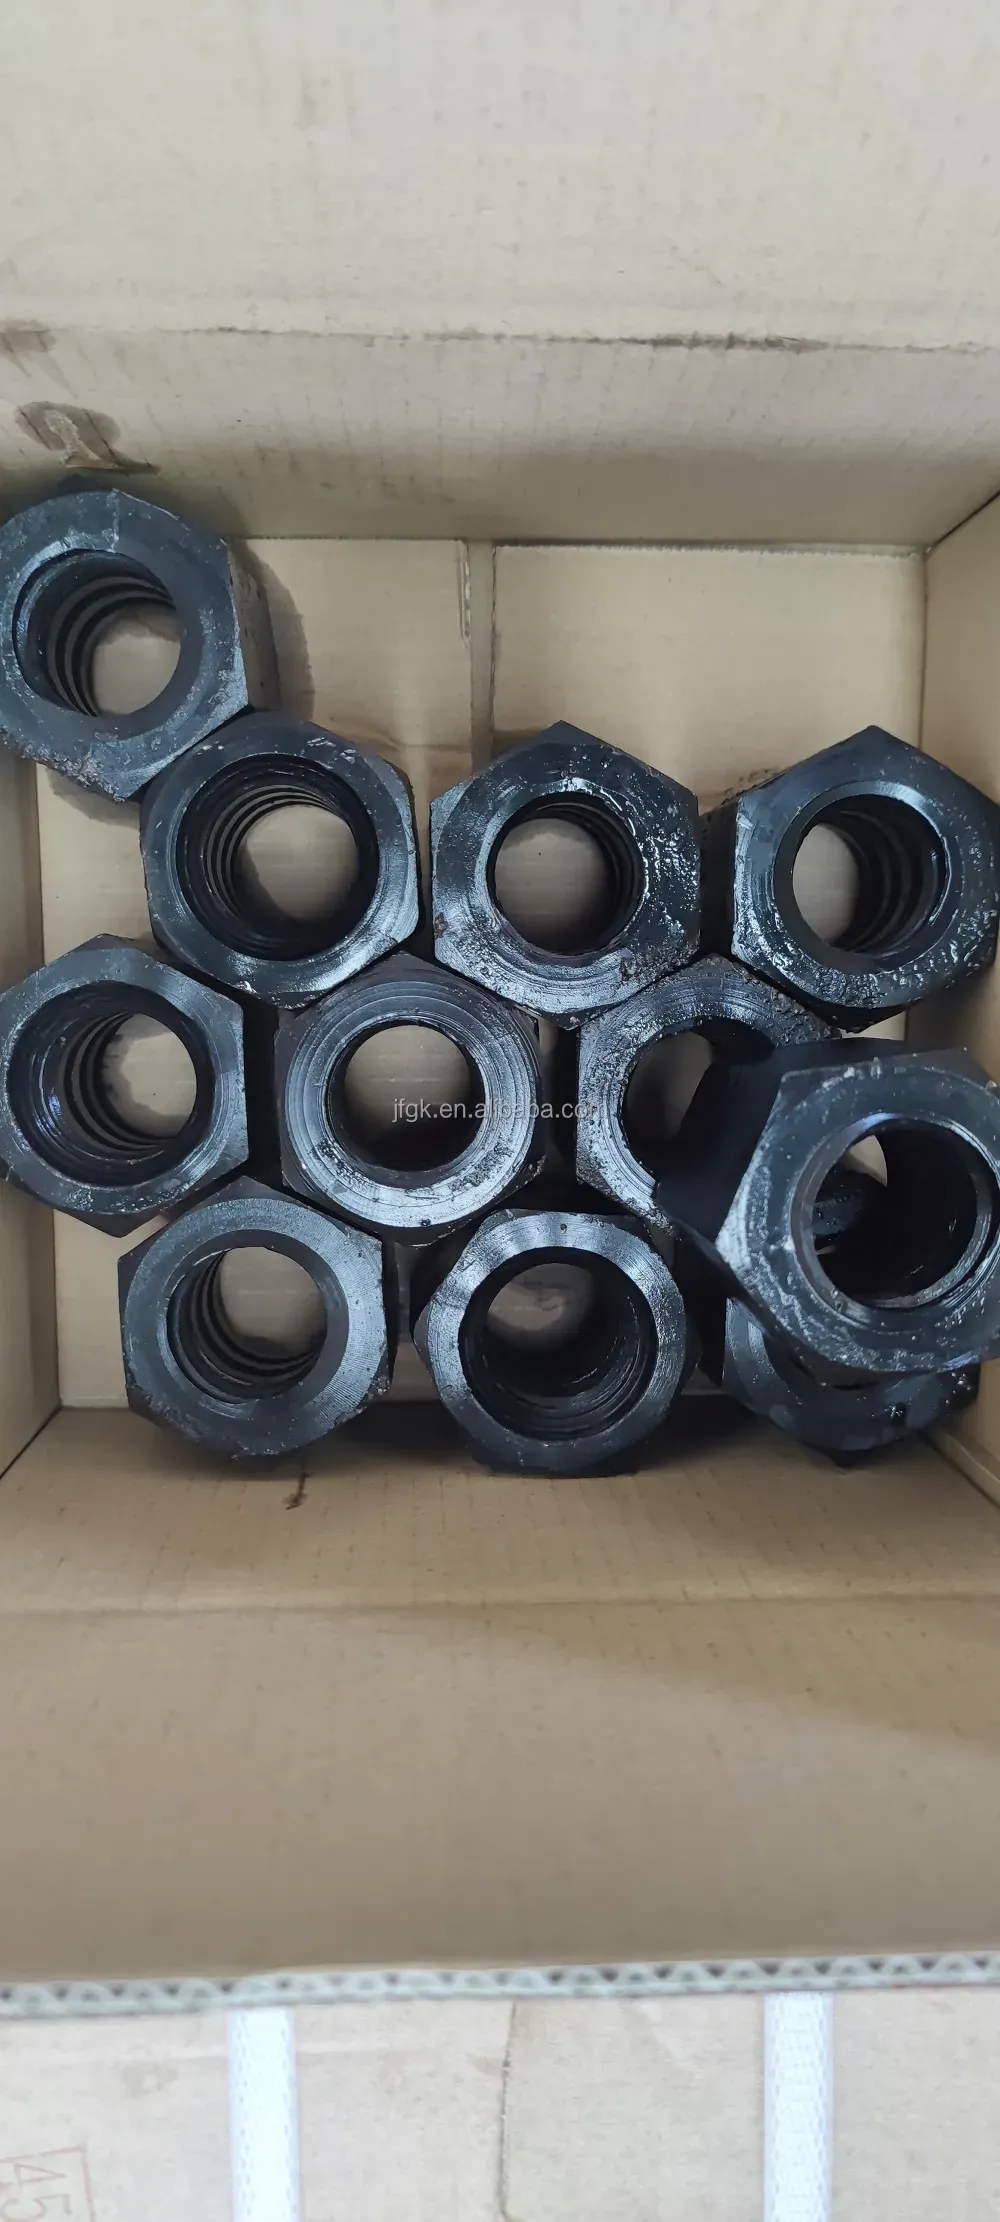 Ball nut Dome nut and m25 m32 m40 roof bolt for mine roof support T103 Rock Bolt Underground Self Drilling Mining